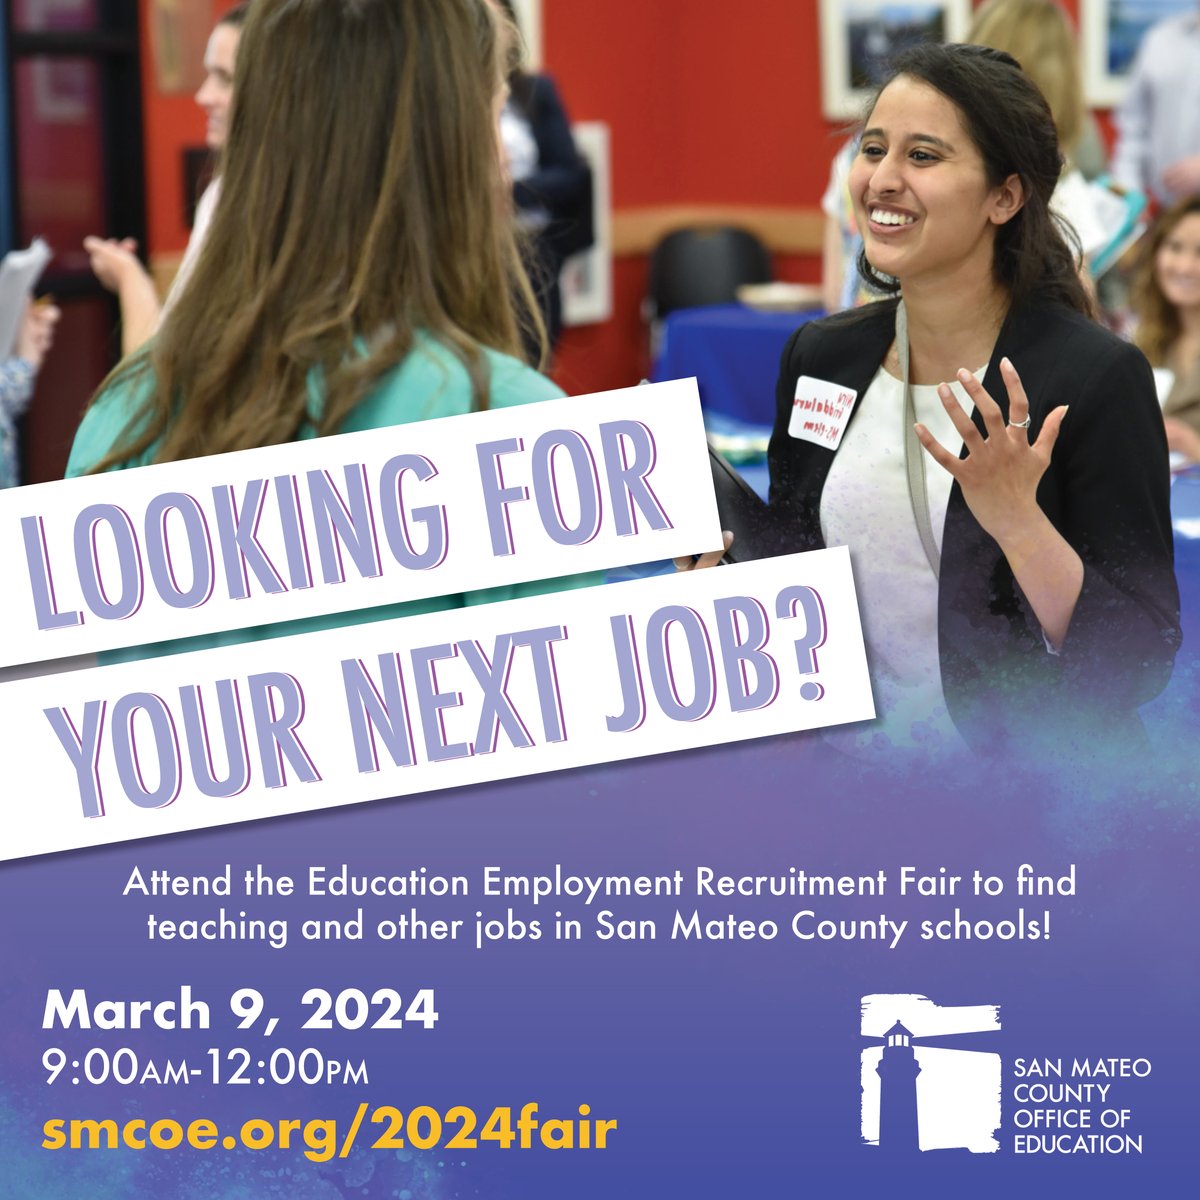 Are you looking for a new job? Look no further than a San Mateo County school district! Come to our recruitment fair on 3/9 to learn about open positions in school districts across the county: smcoe.org/edfair. #TeachSMC #edjobs #classroomcareers #nowhiring #openjobs